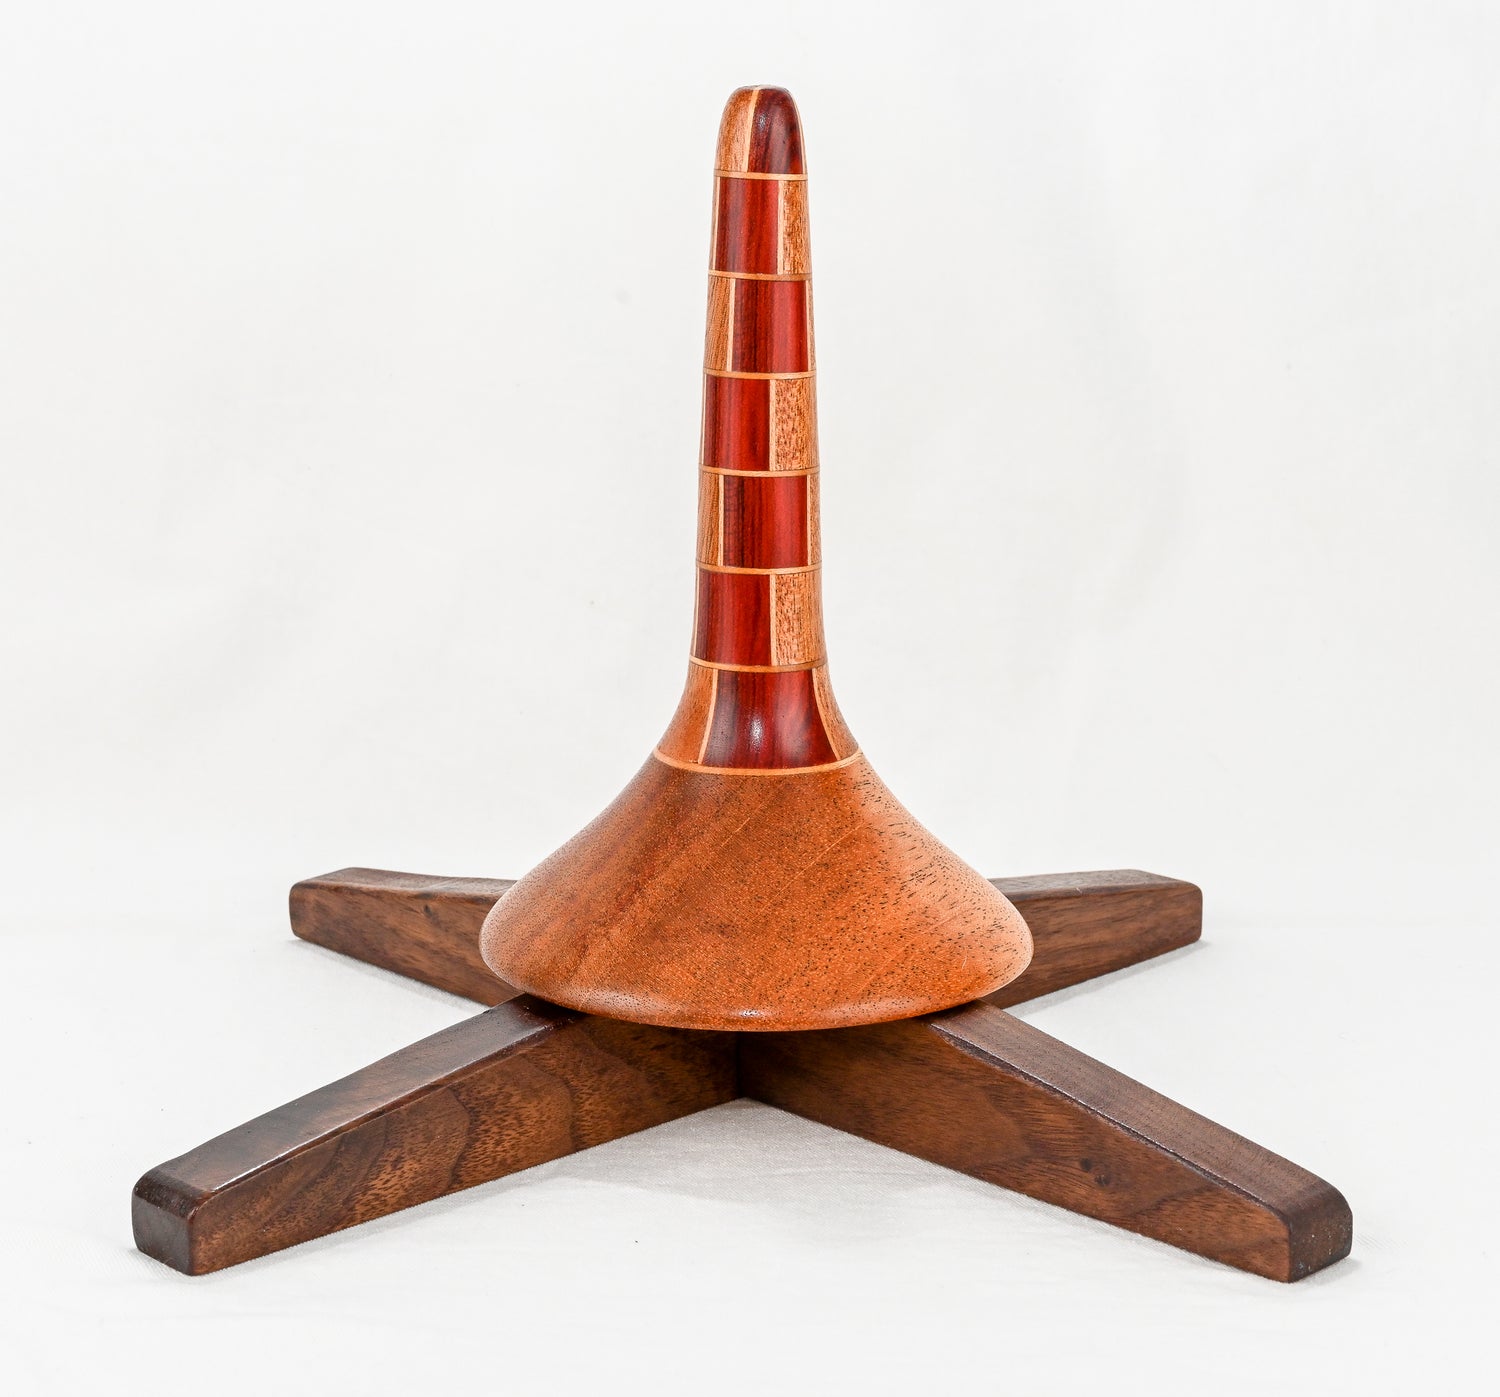 handmade african mahogany and redheart segmented trumpet stand with walnut legs